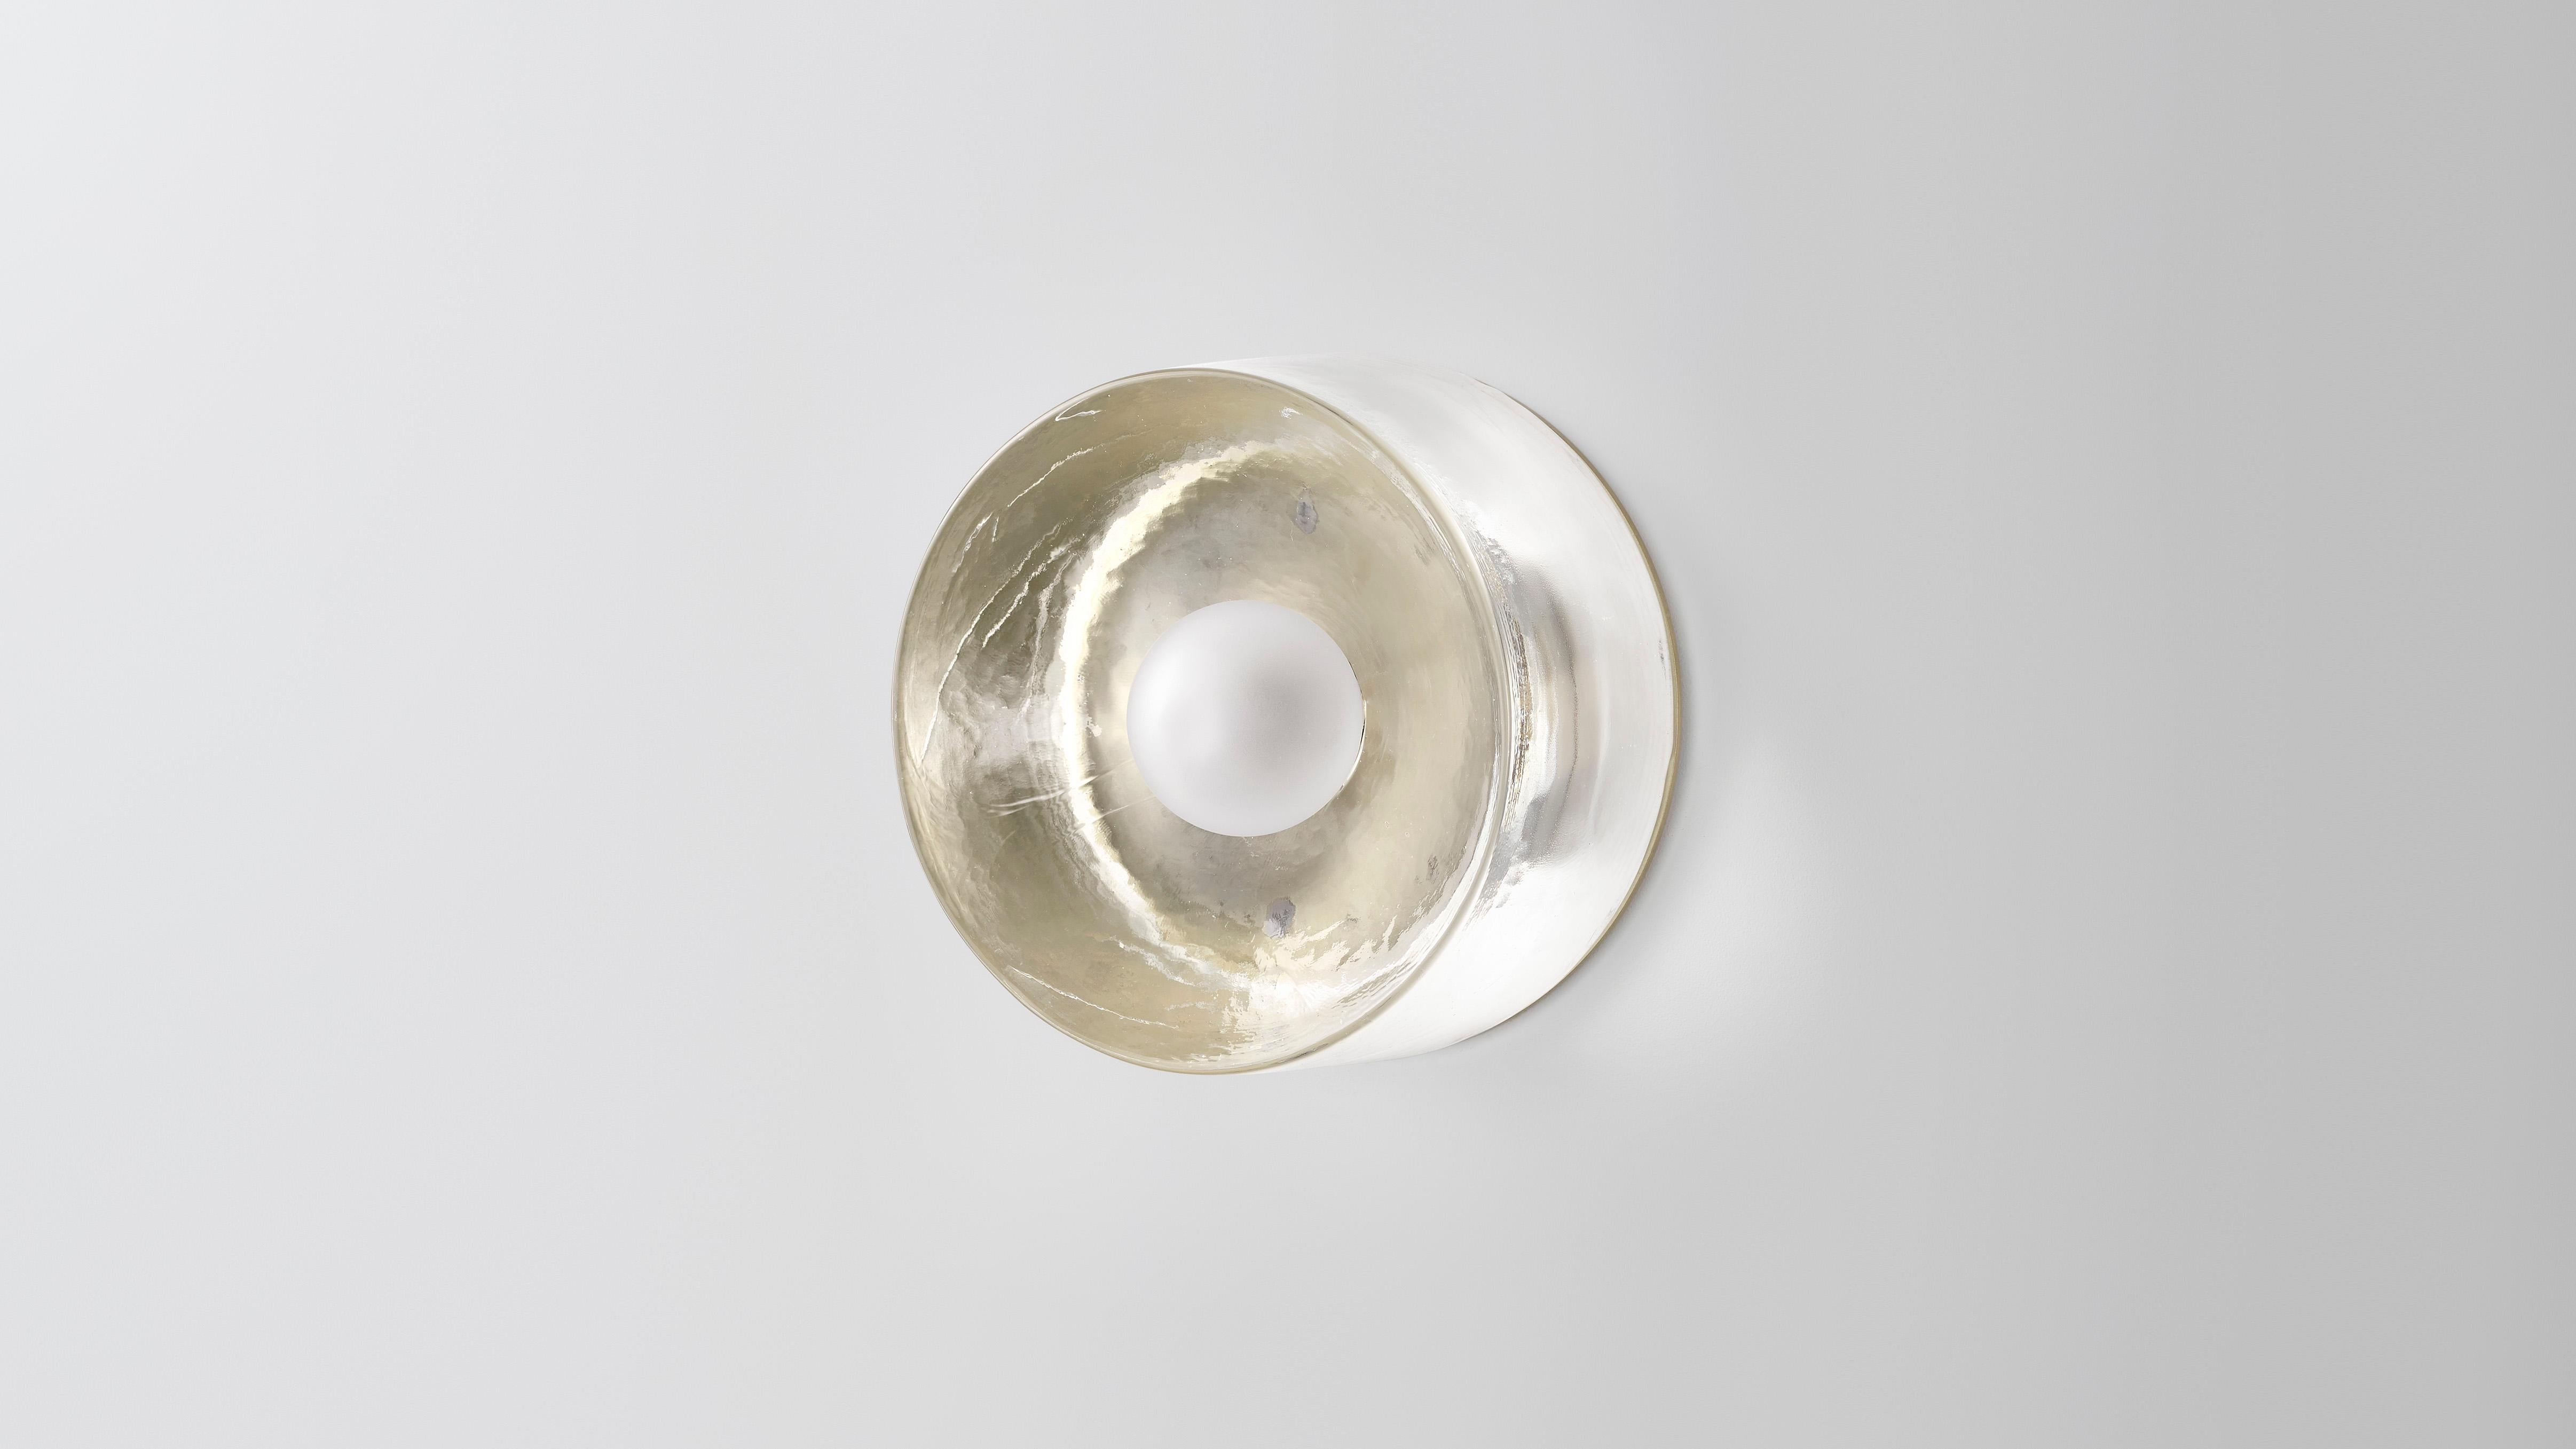 Mini anton glass wall scounce by Volker Haug
Dimensions: Diameter 13 cm x depth 8.3 cm 
Material: Cast glass
Backing Plate: Polished, bronzed or chromed brass
Lamp: G9 LED (240V / 120V US). 12V option available.
Glass Bulb: 45mm ø, Frosted
Weight: